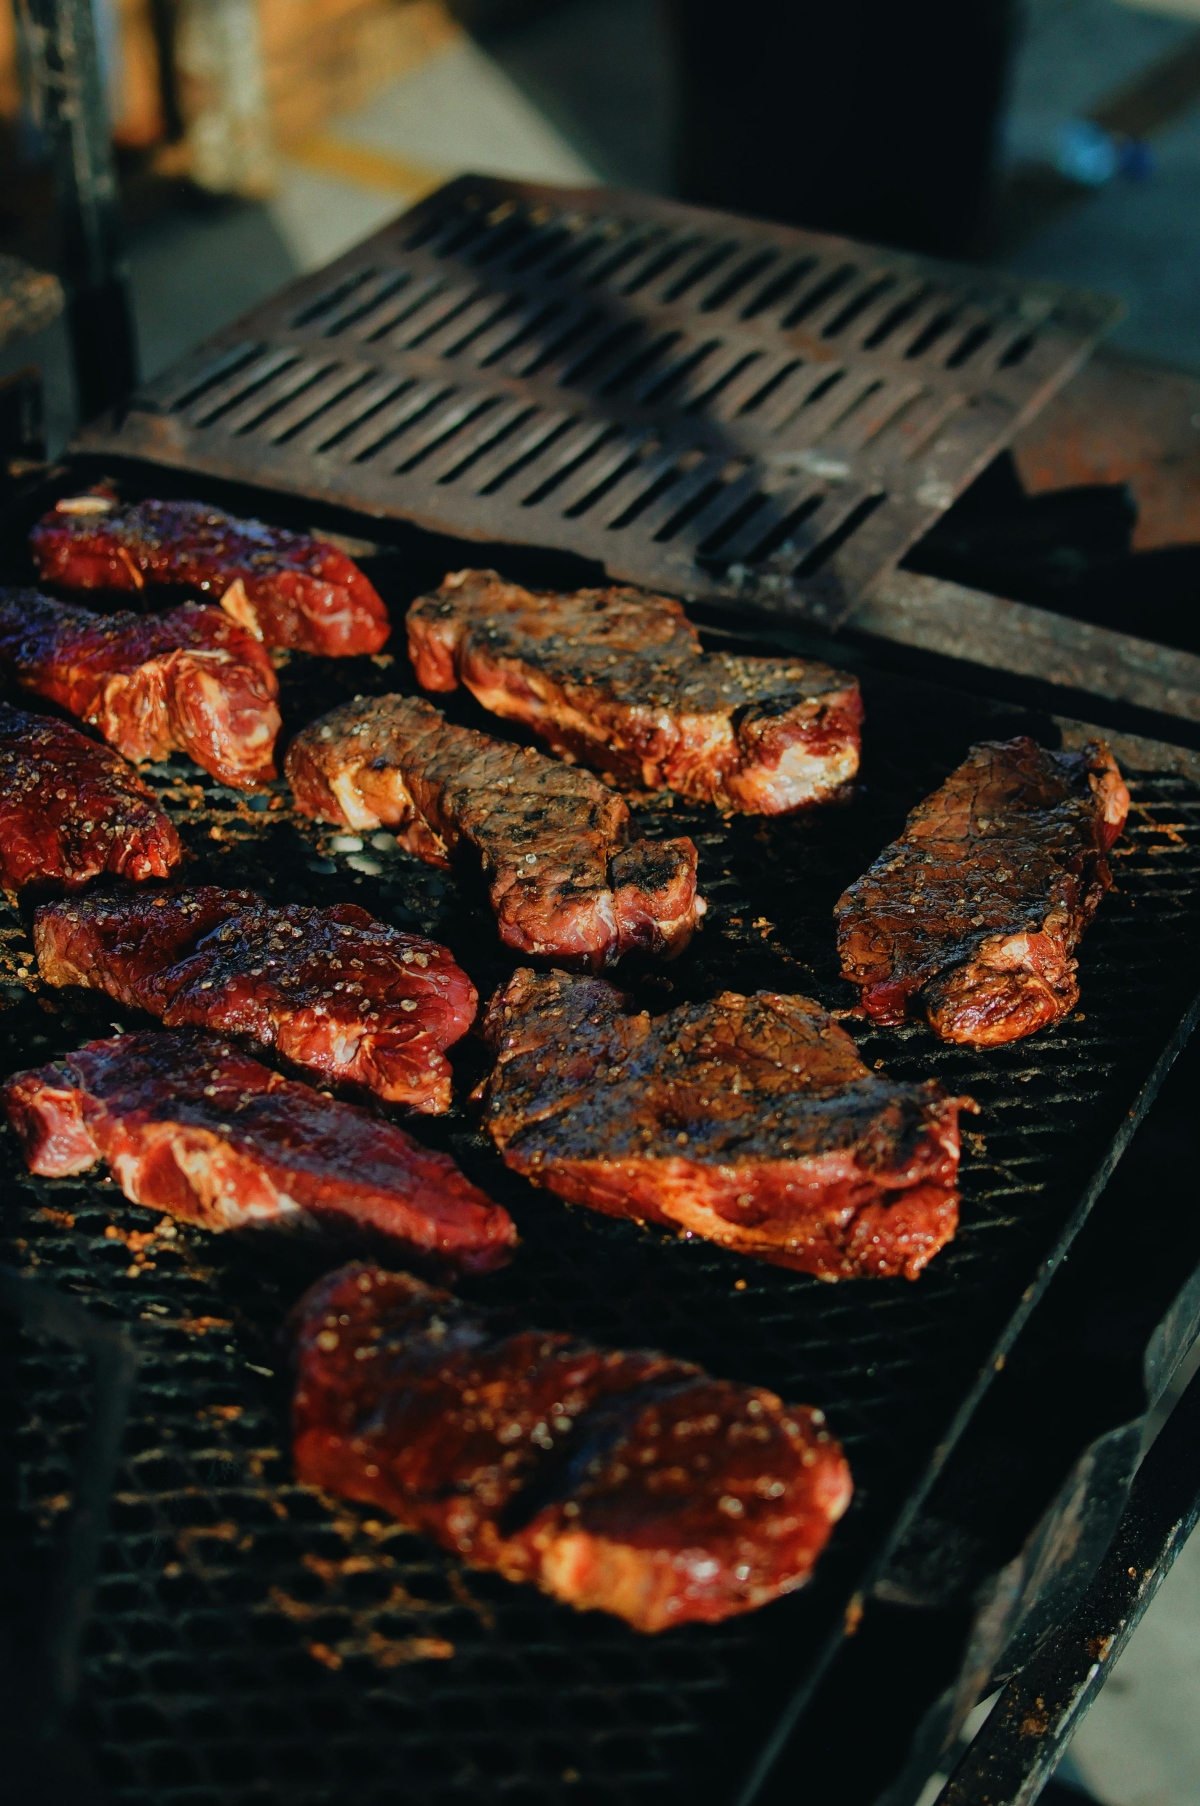 steaks on barbecue grill